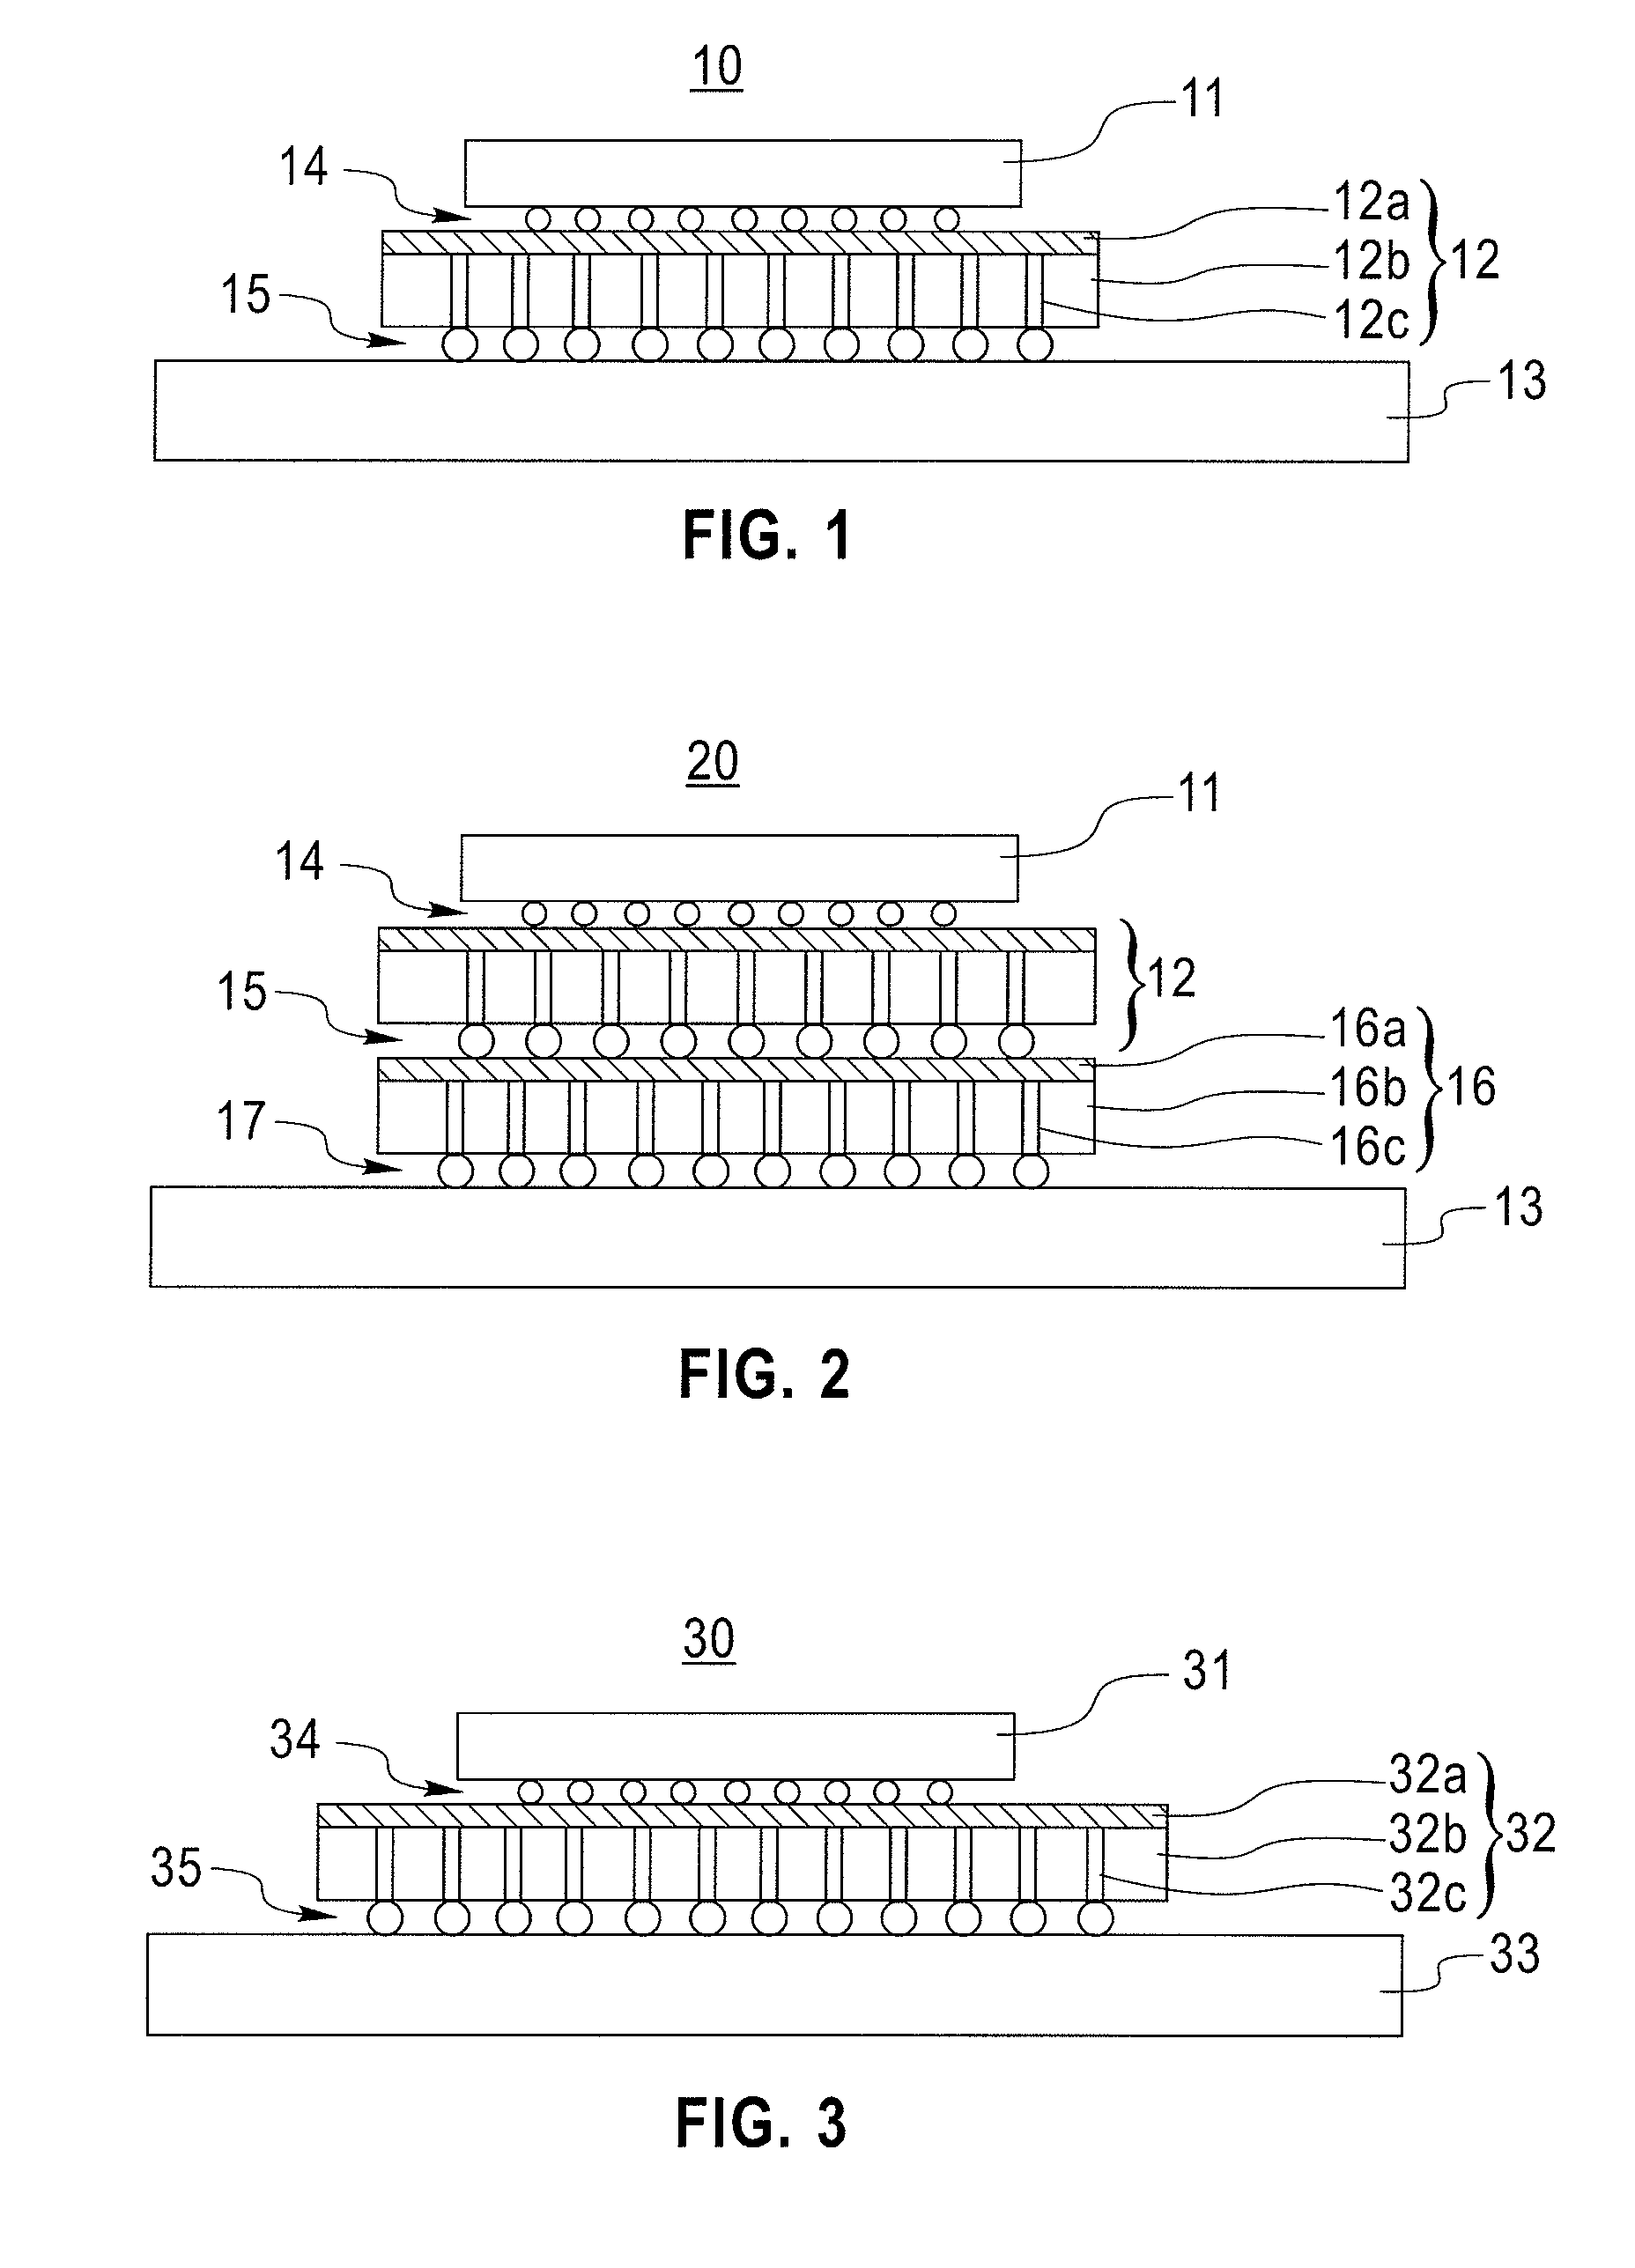 Apparatus and Methods for Constructing Semiconductor Chip Packages with Silicon Space Transformer Carriers